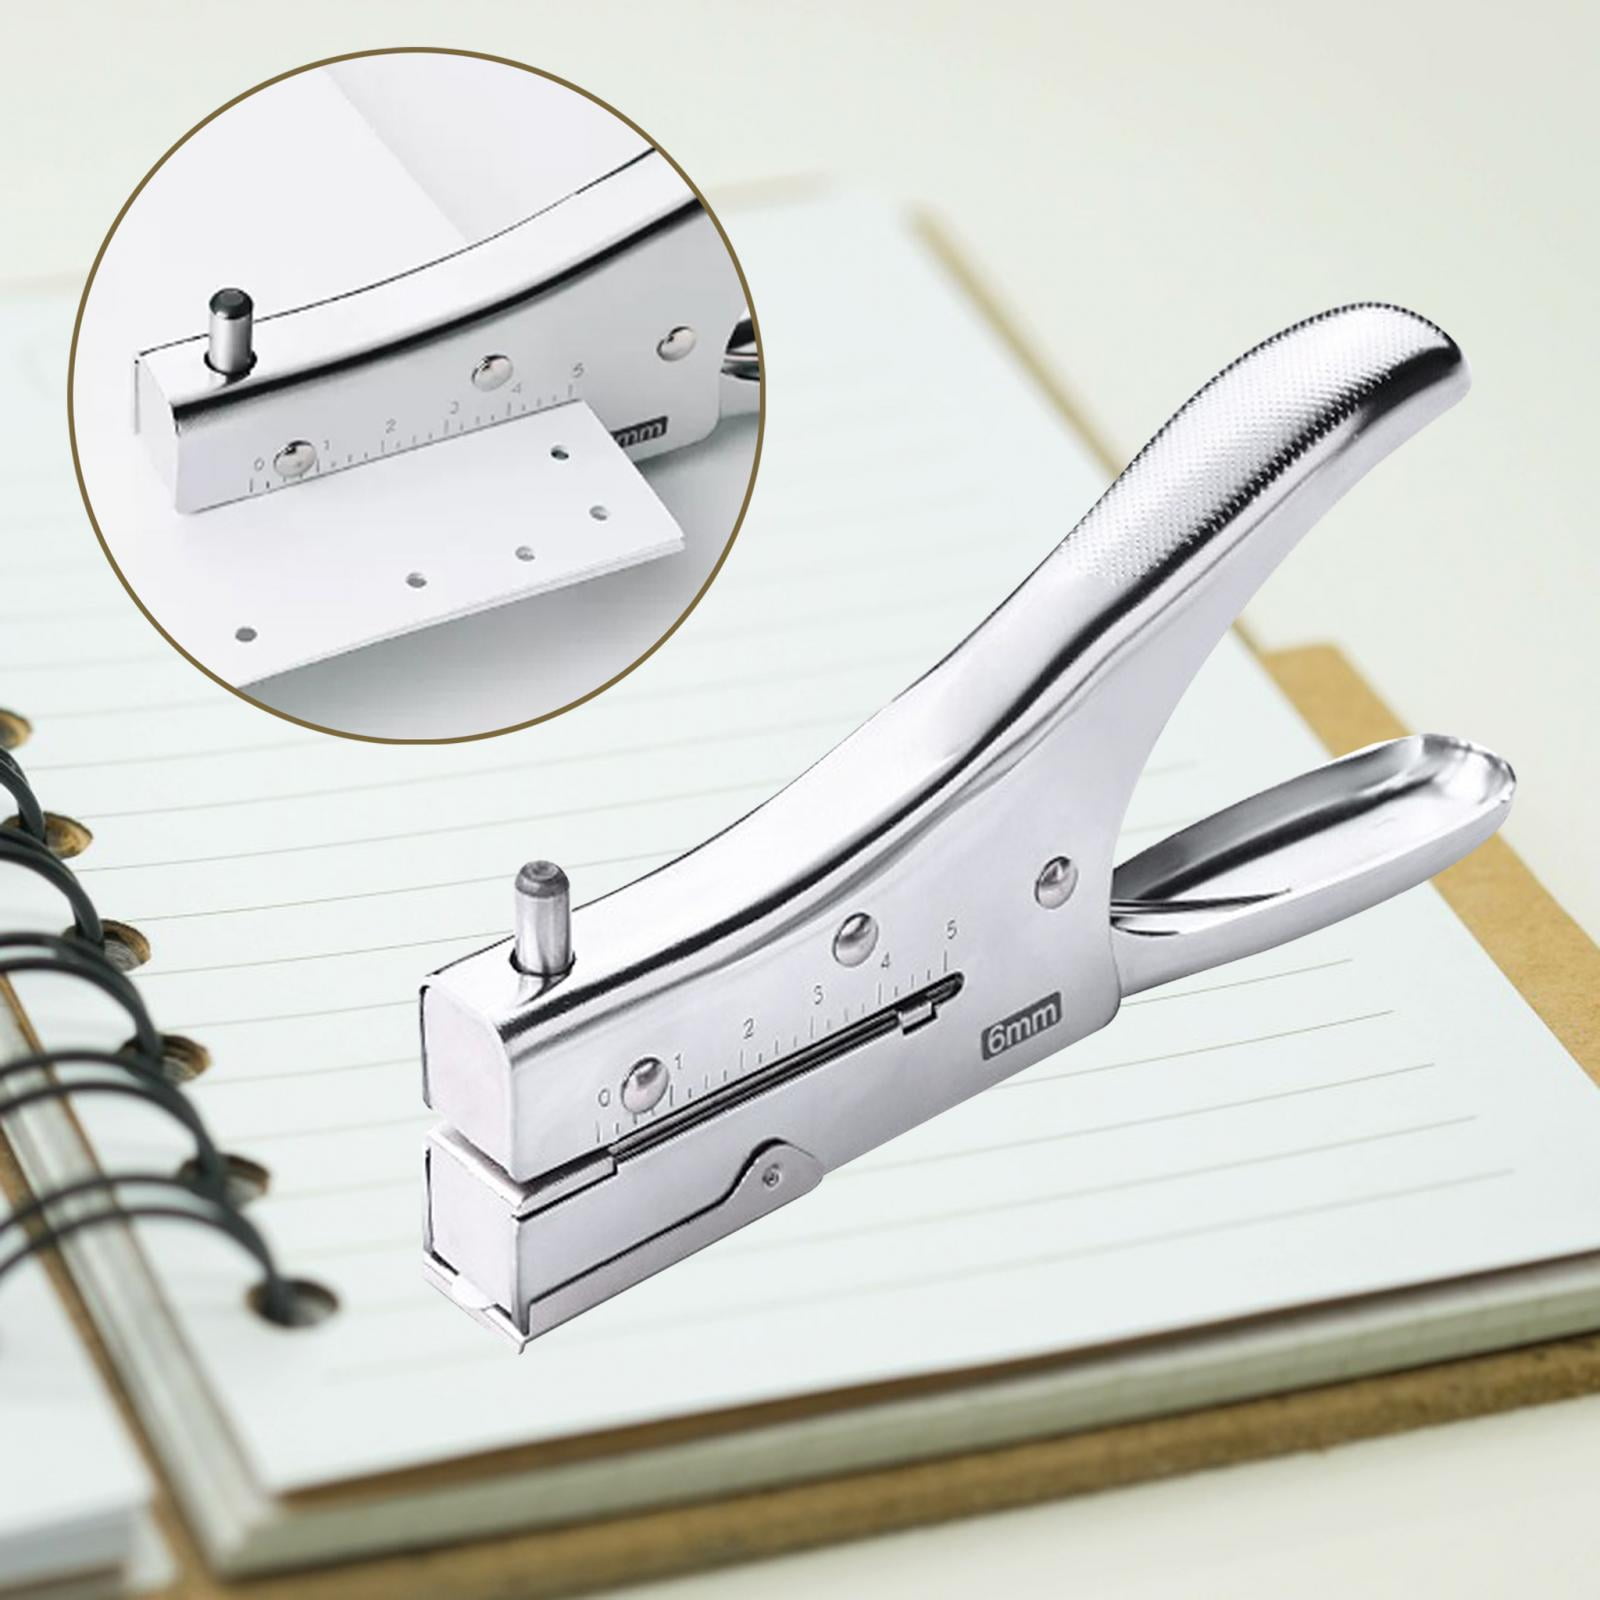 Premium Tool - 3mm / 6mm Hole Metal Puncher Design for Quick and Easy, Size: 3 mm